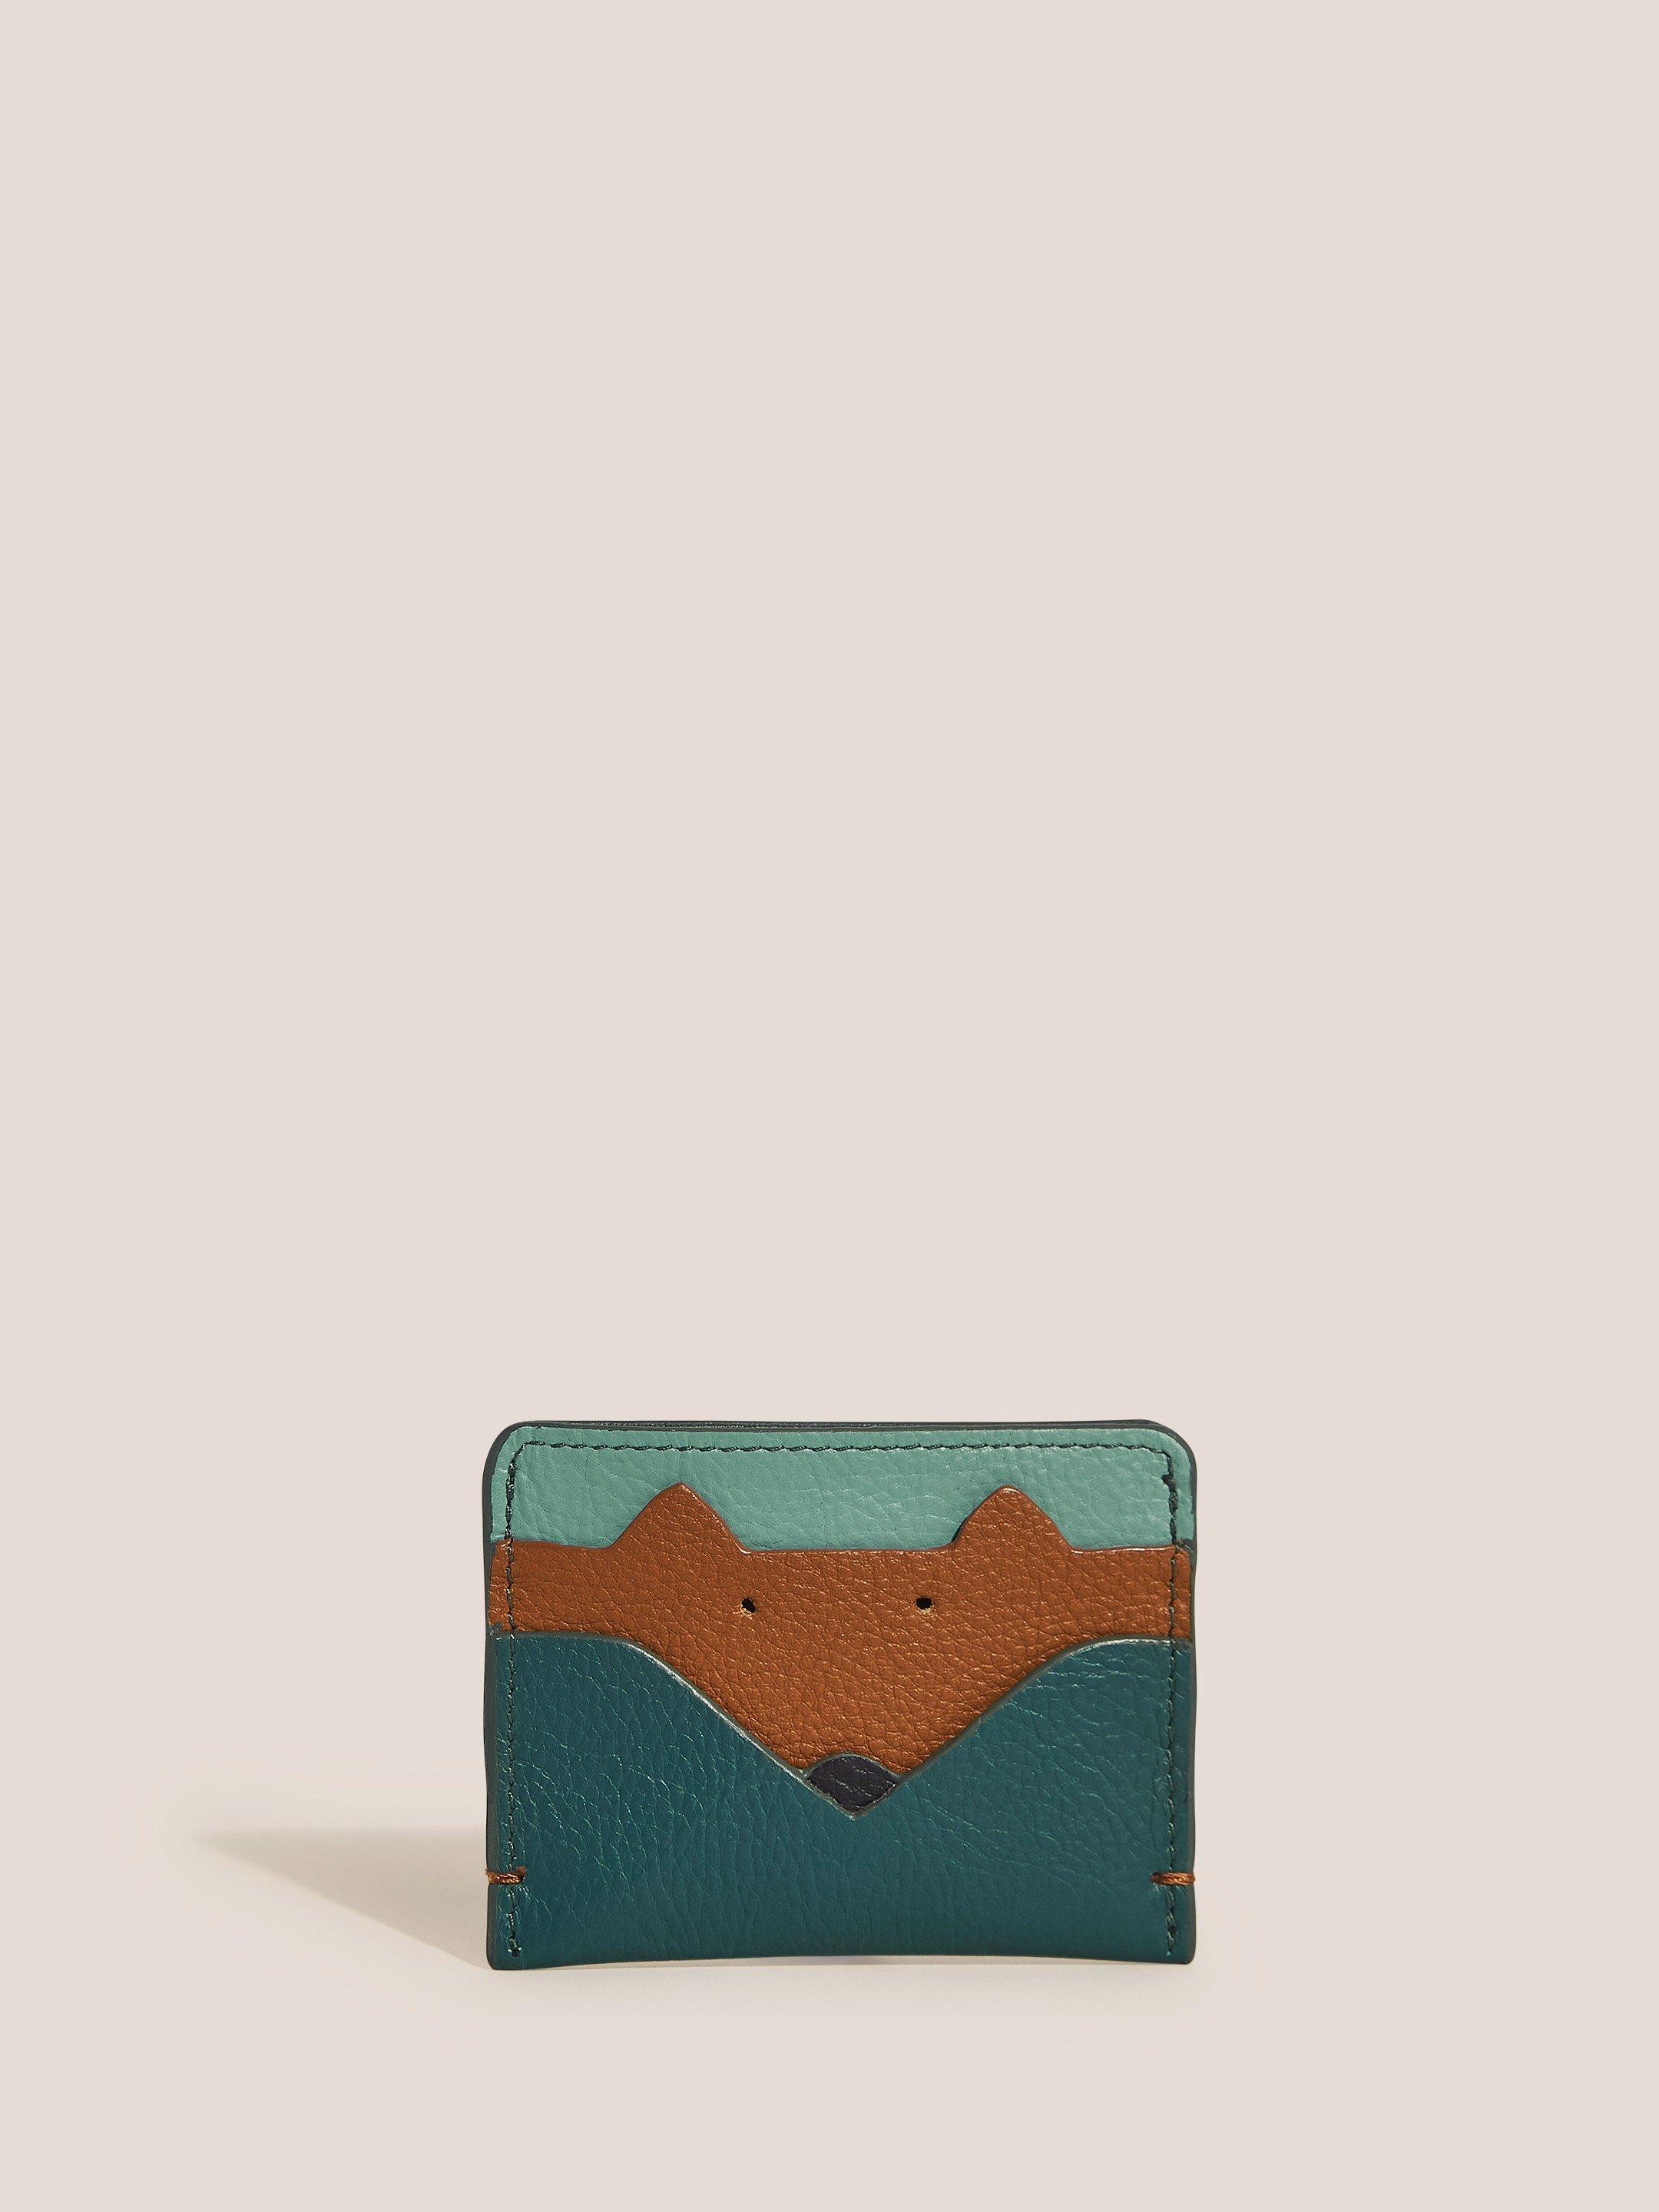 Elodie Fox Offcut Cardholder in TEAL MLT - FLAT FRONT